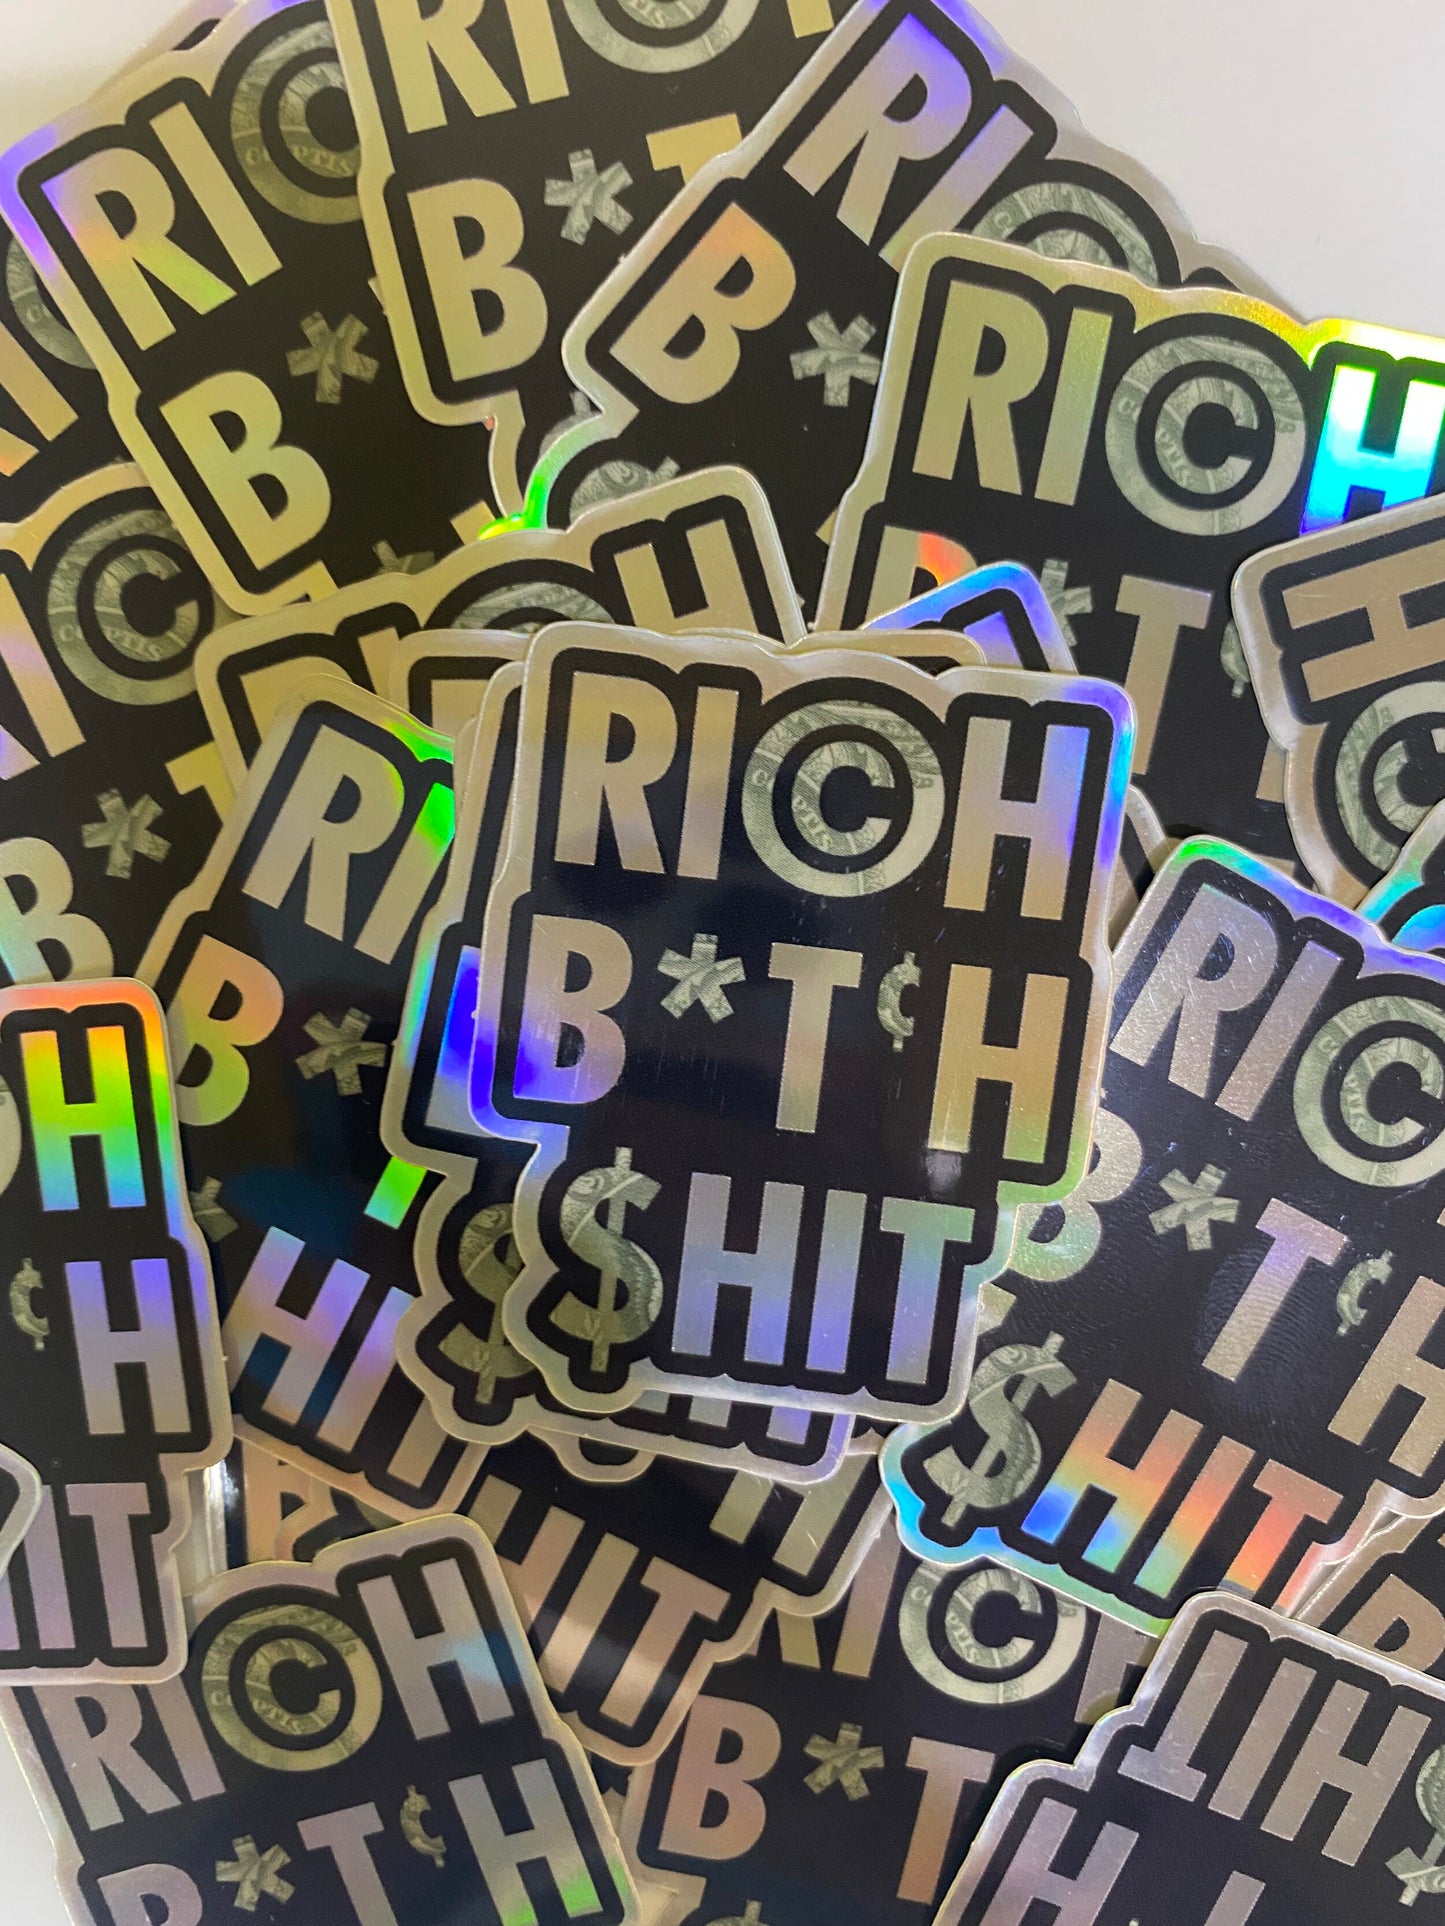 Rich B*tch Sh*t holographic high quality vinyl waterproof and scratch resistant sticker from Goods Made By Digitrillnana. Perfect for laptops, water bottles, phone cases, luggage, journals, and more! Black Woman Owned.